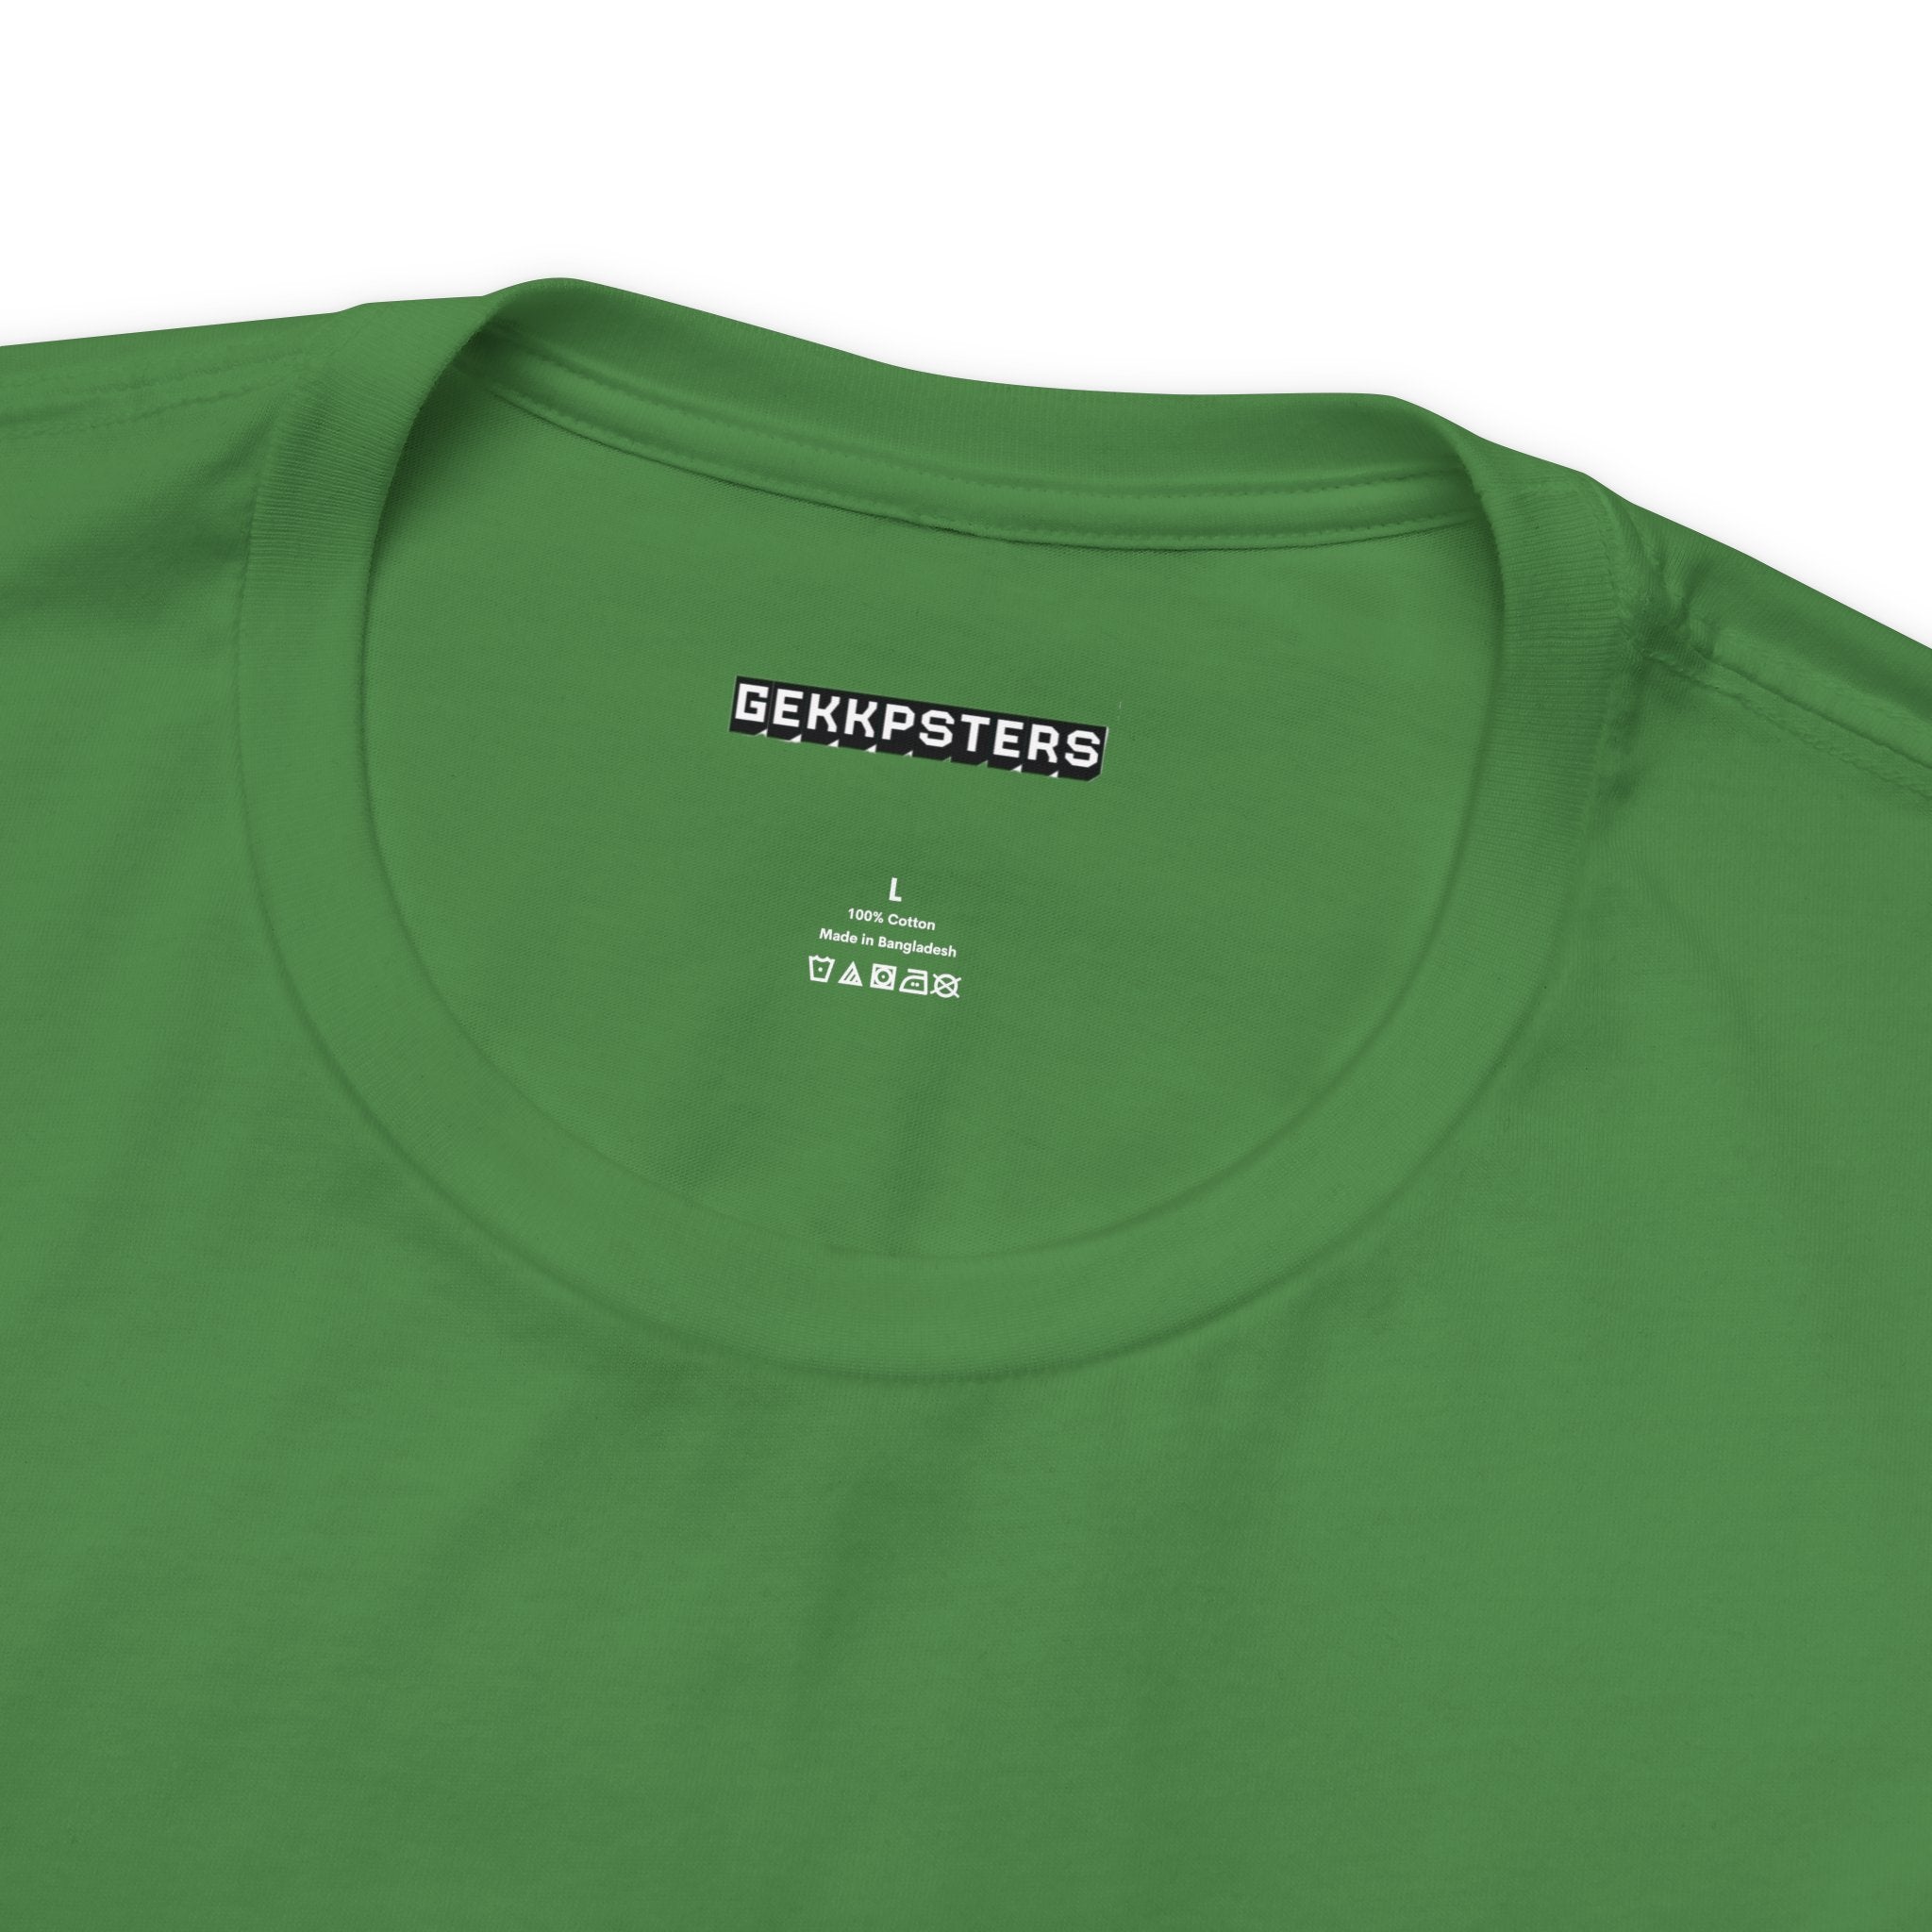 A green Hello, Gonna Cry T-shirt with a logo on it.